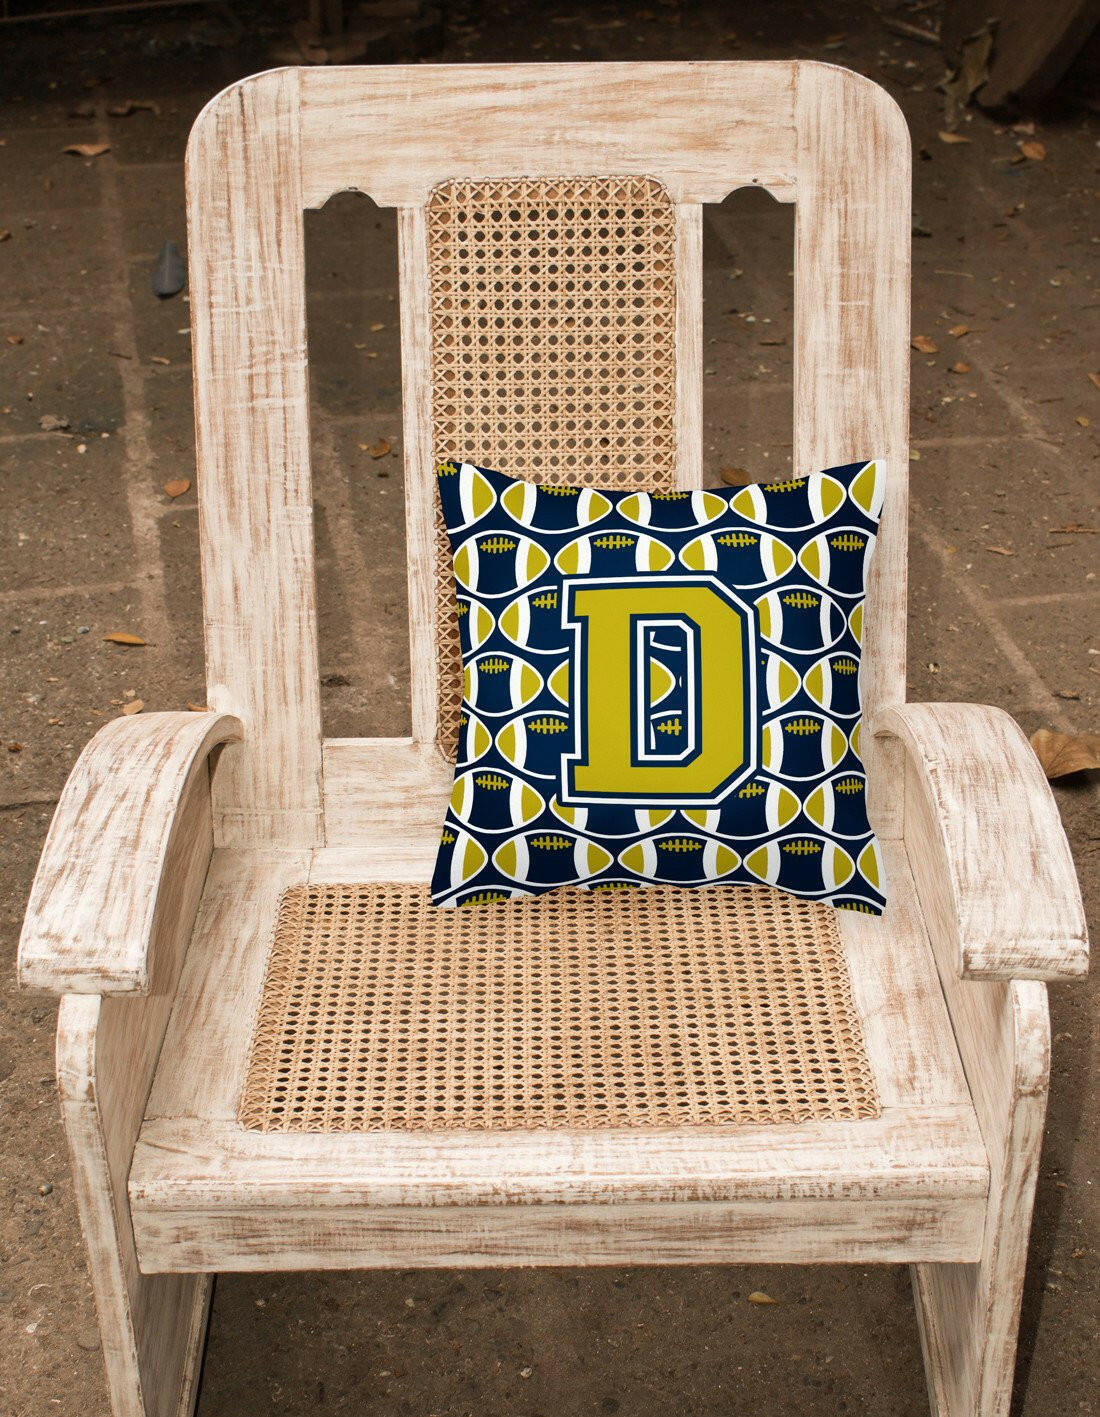 Letter D Football Blue and Gold Fabric Decorative Pillow CJ1074-DPW1414 by Caroline's Treasures